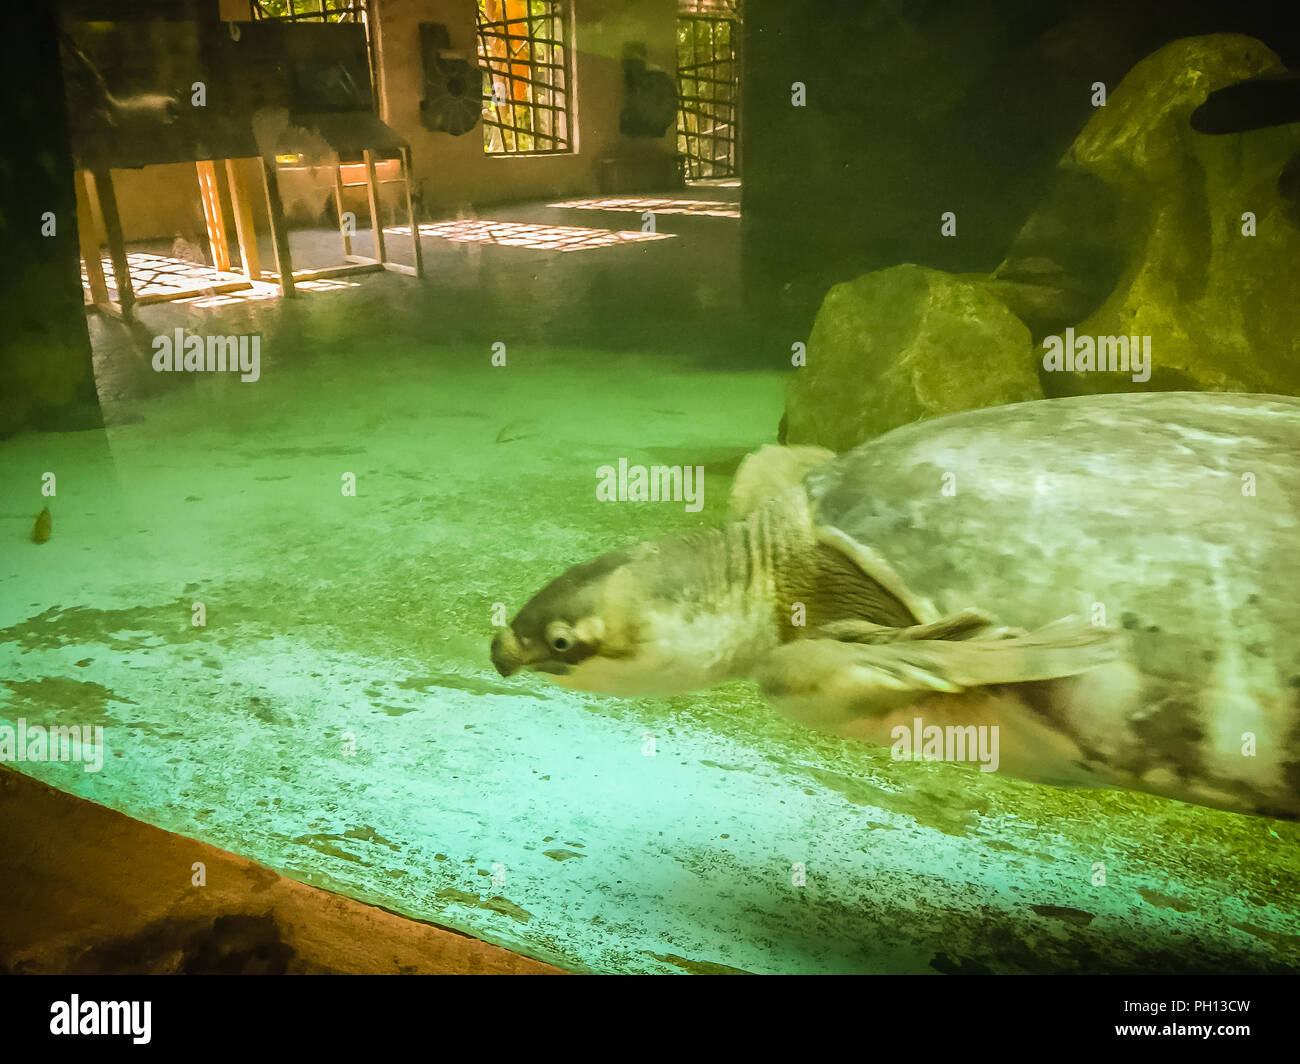 long-necked turtle (snake-necked turtle) is swimming in the glass pond. Stock Photo